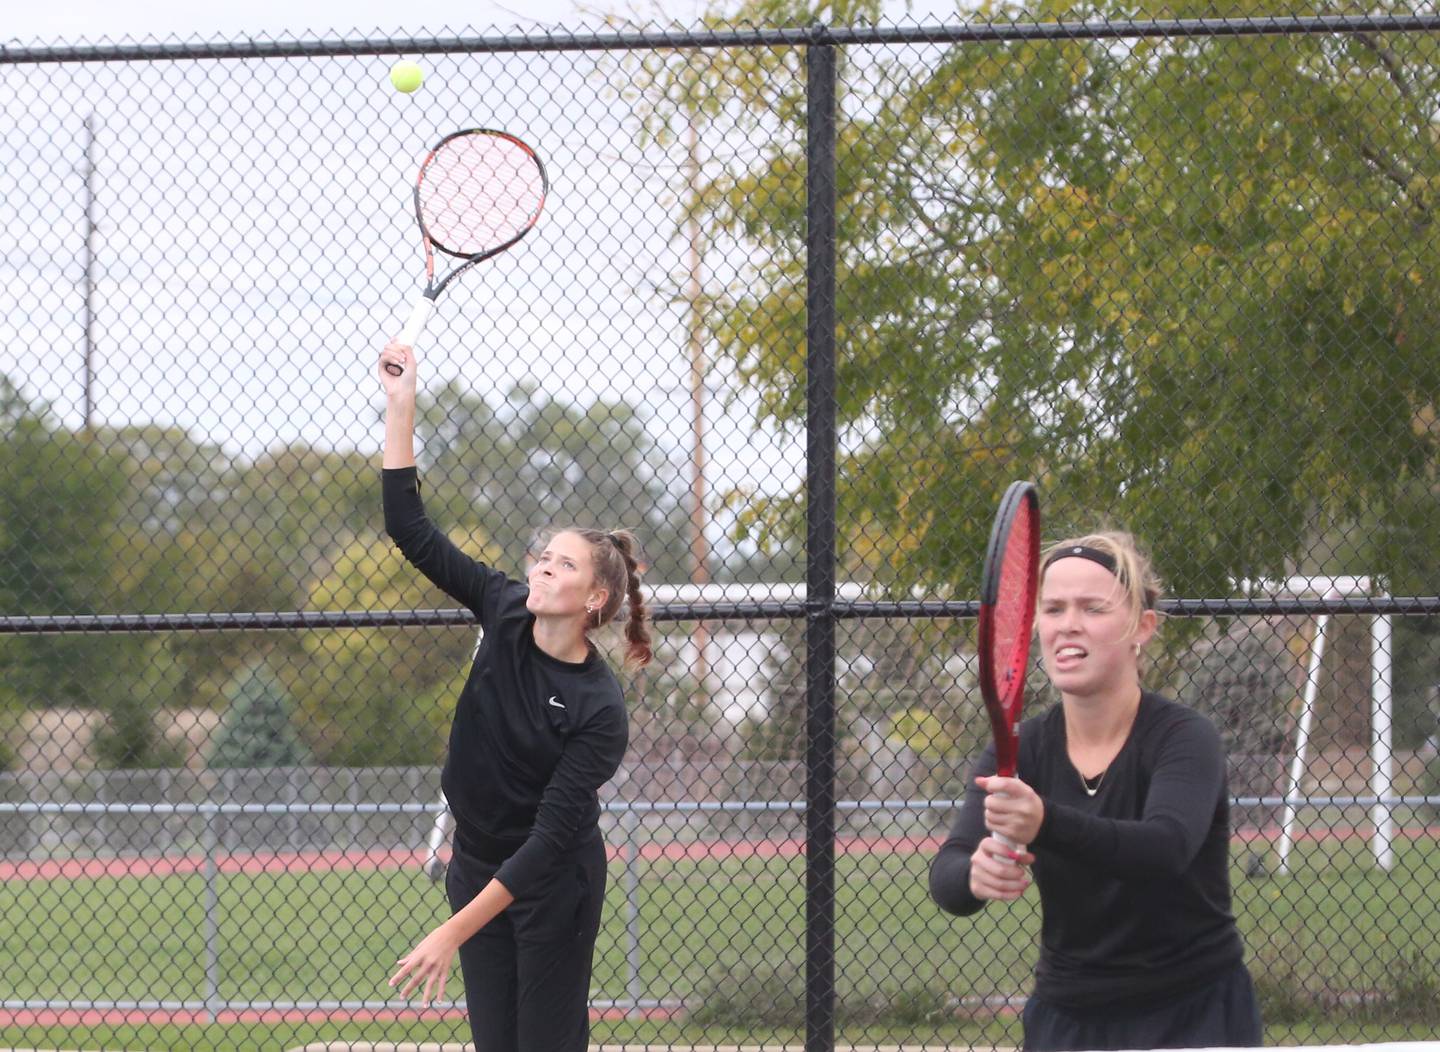 Ottawa doubles team of seniors Rylee O'Fallon (serving) and Emma Cushing play Morris doubles players Meghan Bzdill and Shreya Patel in the semifinals of the Class 1A Sectional tennis meet on Monday, Oct. 16, 2023 at the La Salle-Peru Sports Complex in La Salle.